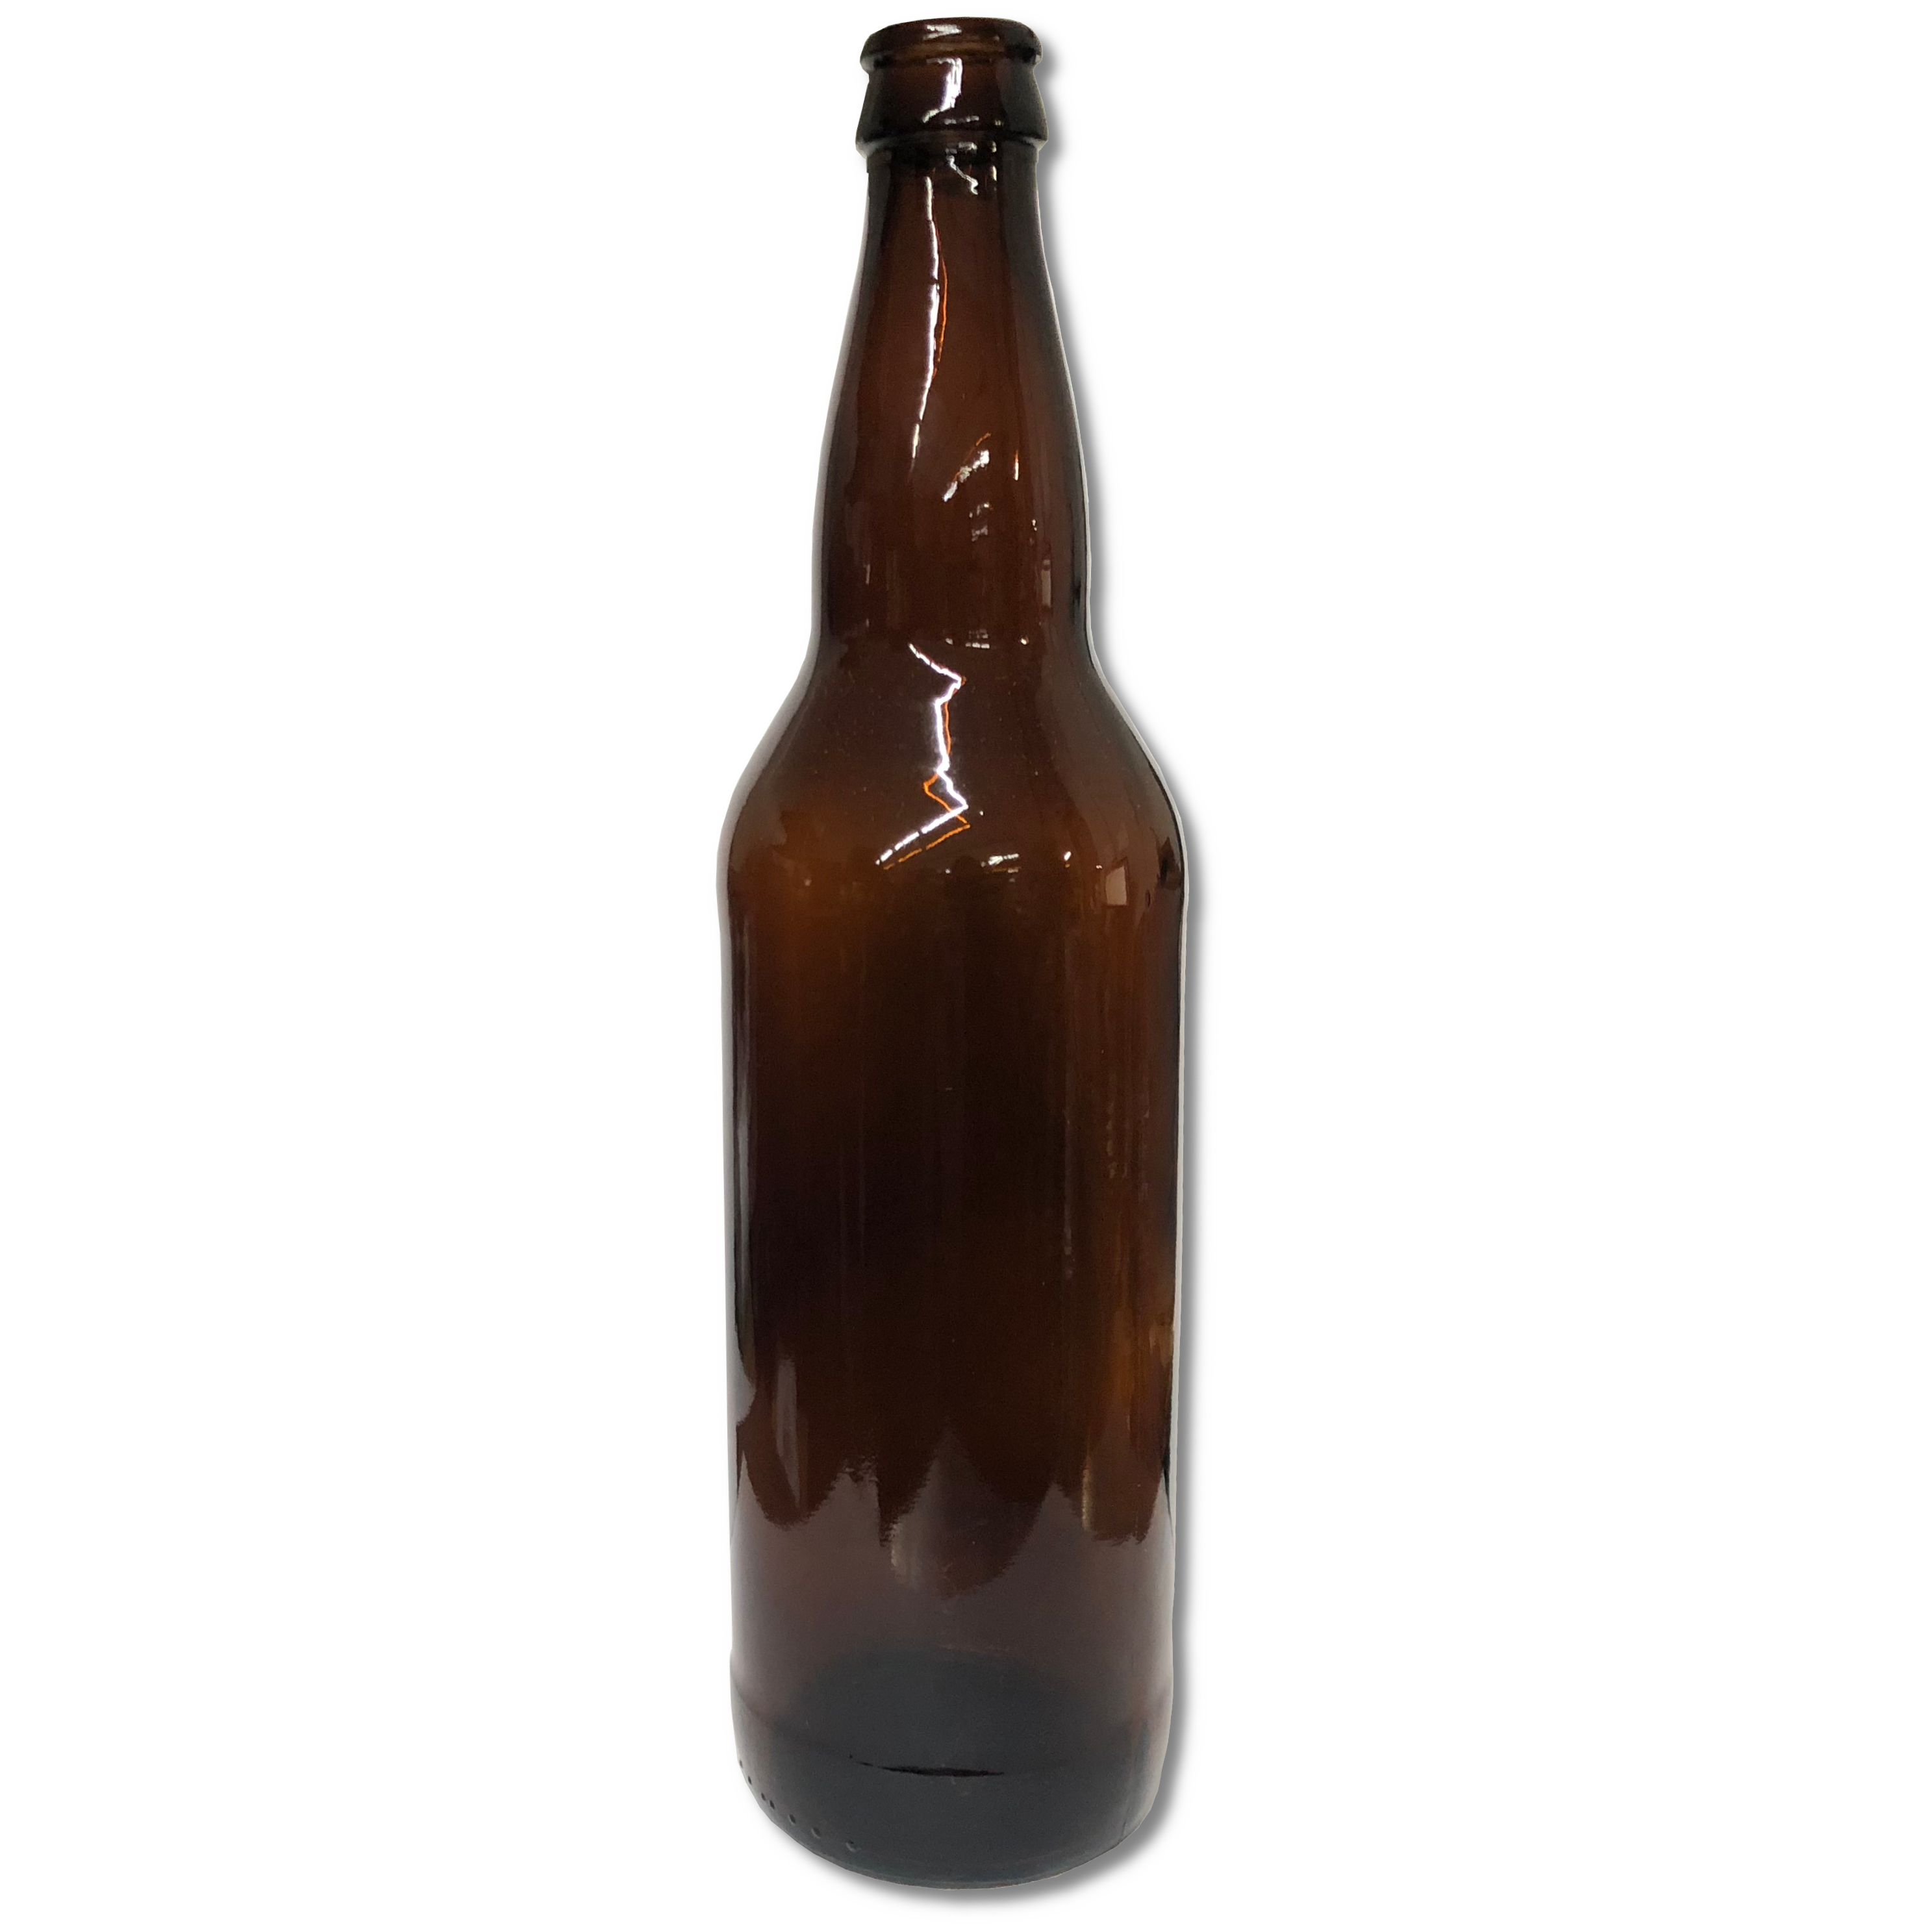 12-Pack 16 oz. Brown Glass Beer Bottles with Swing Top Stoppers, Bottl